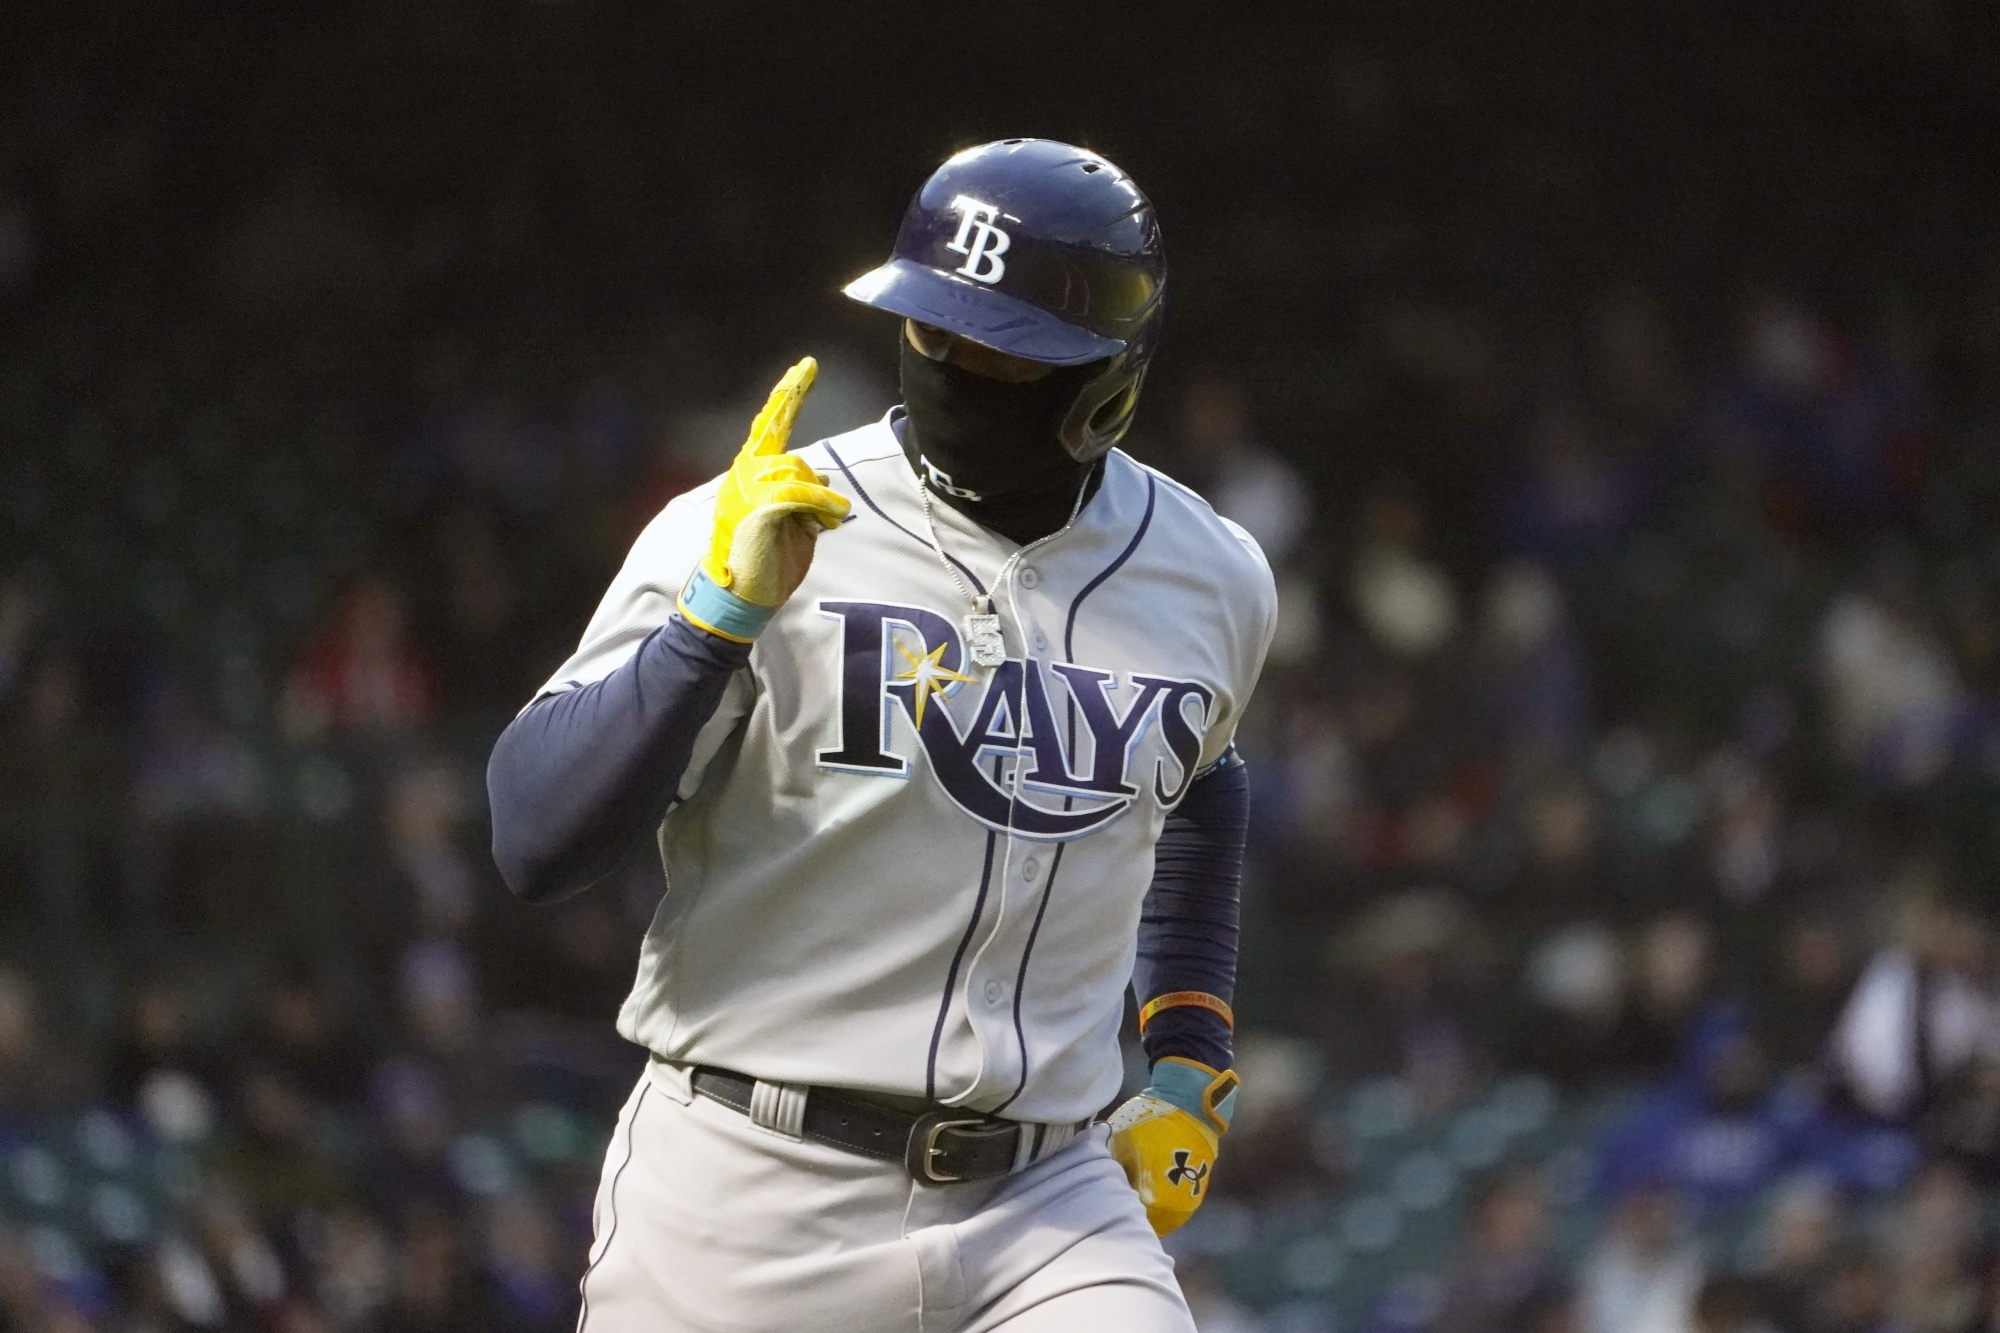 MLB to make decision on Rays' Wander Franco amid allegations he